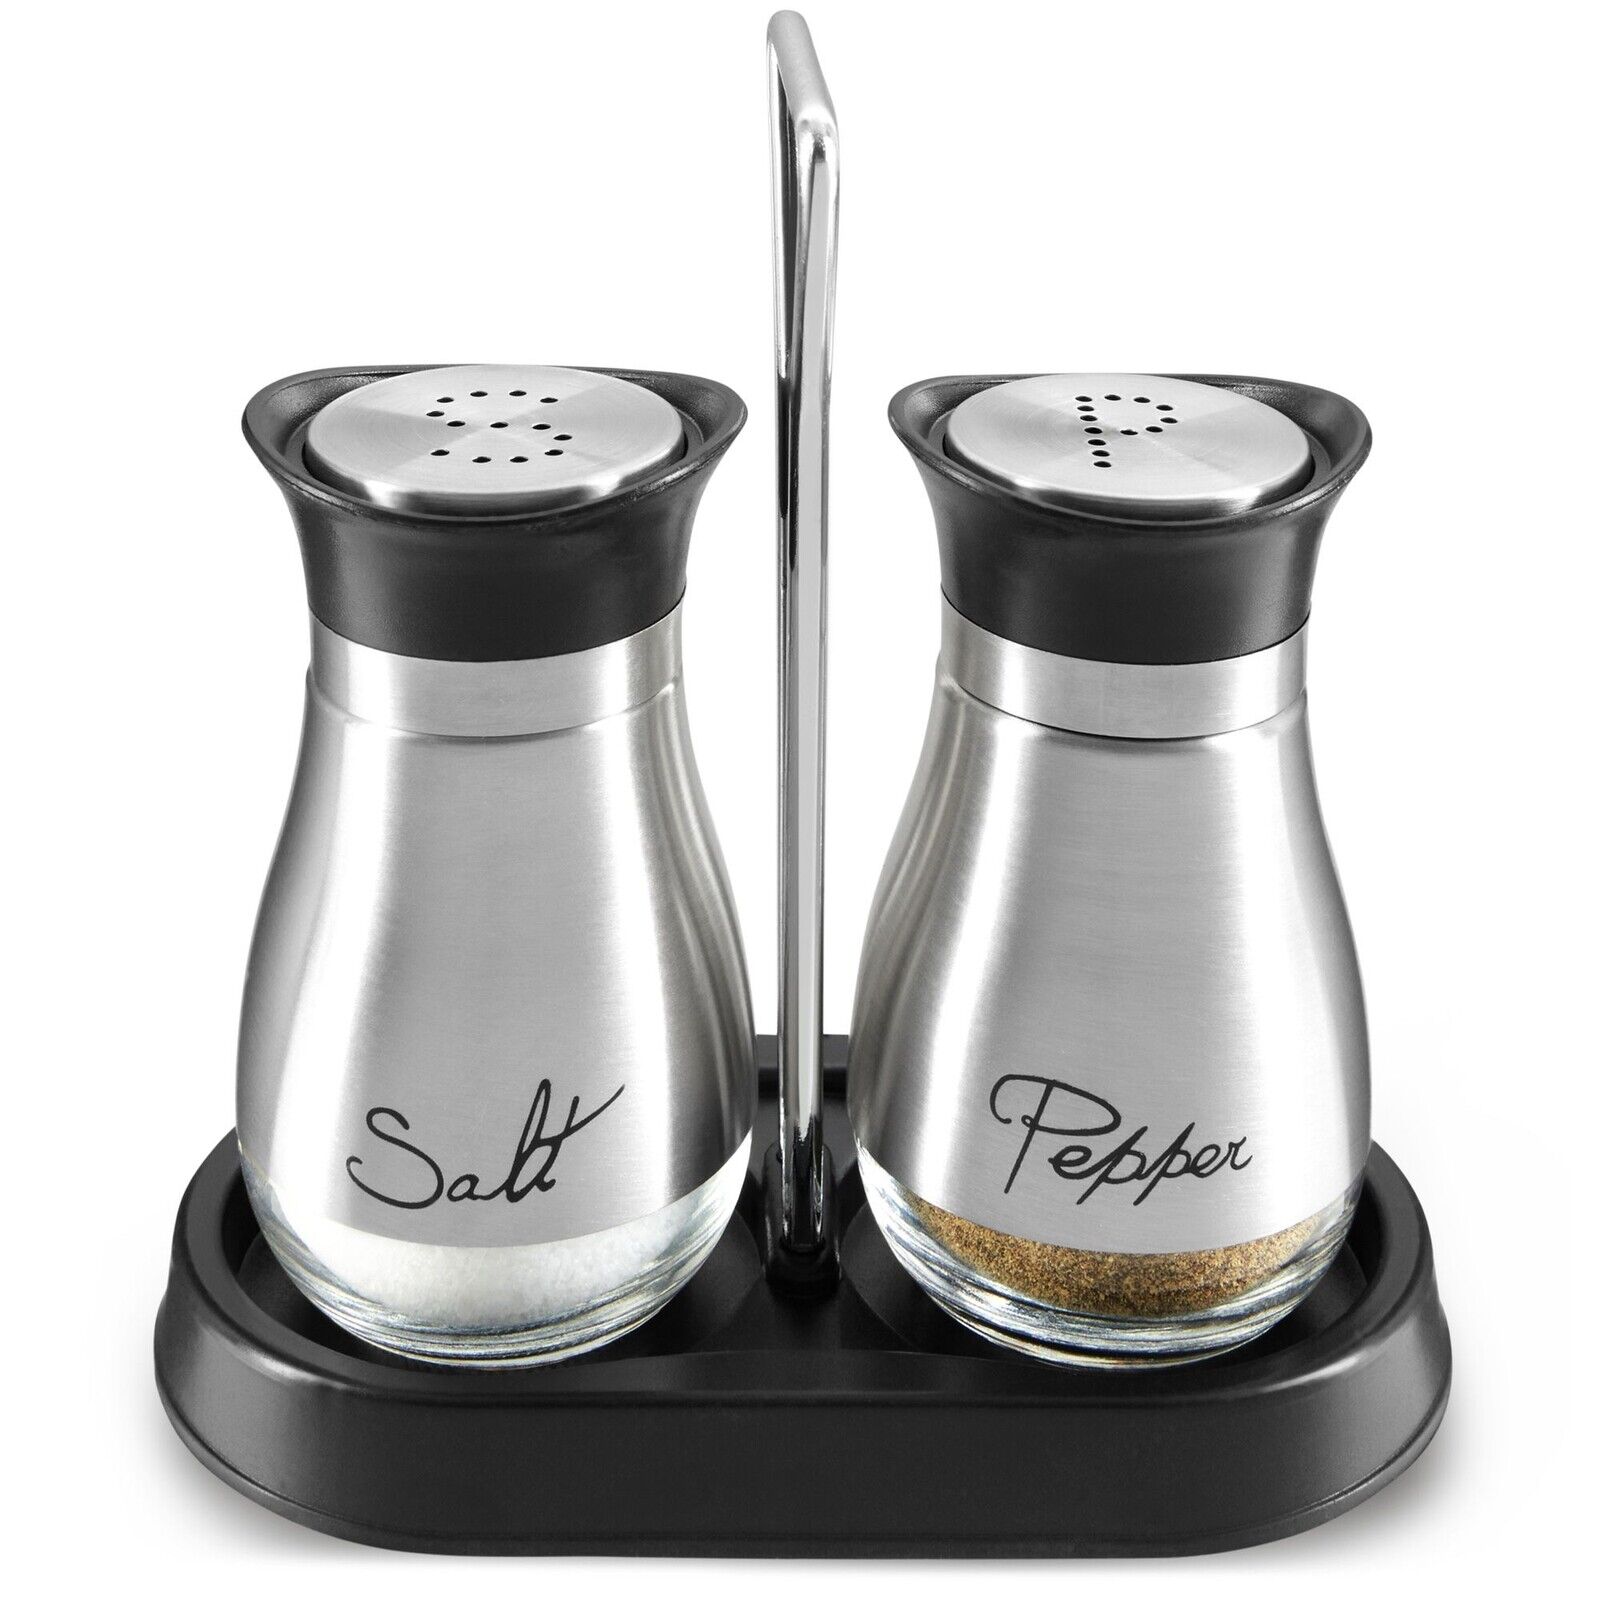 3 Piece Stainless Steel Salt and Pepper Shakers Set with Holder (4 oz)